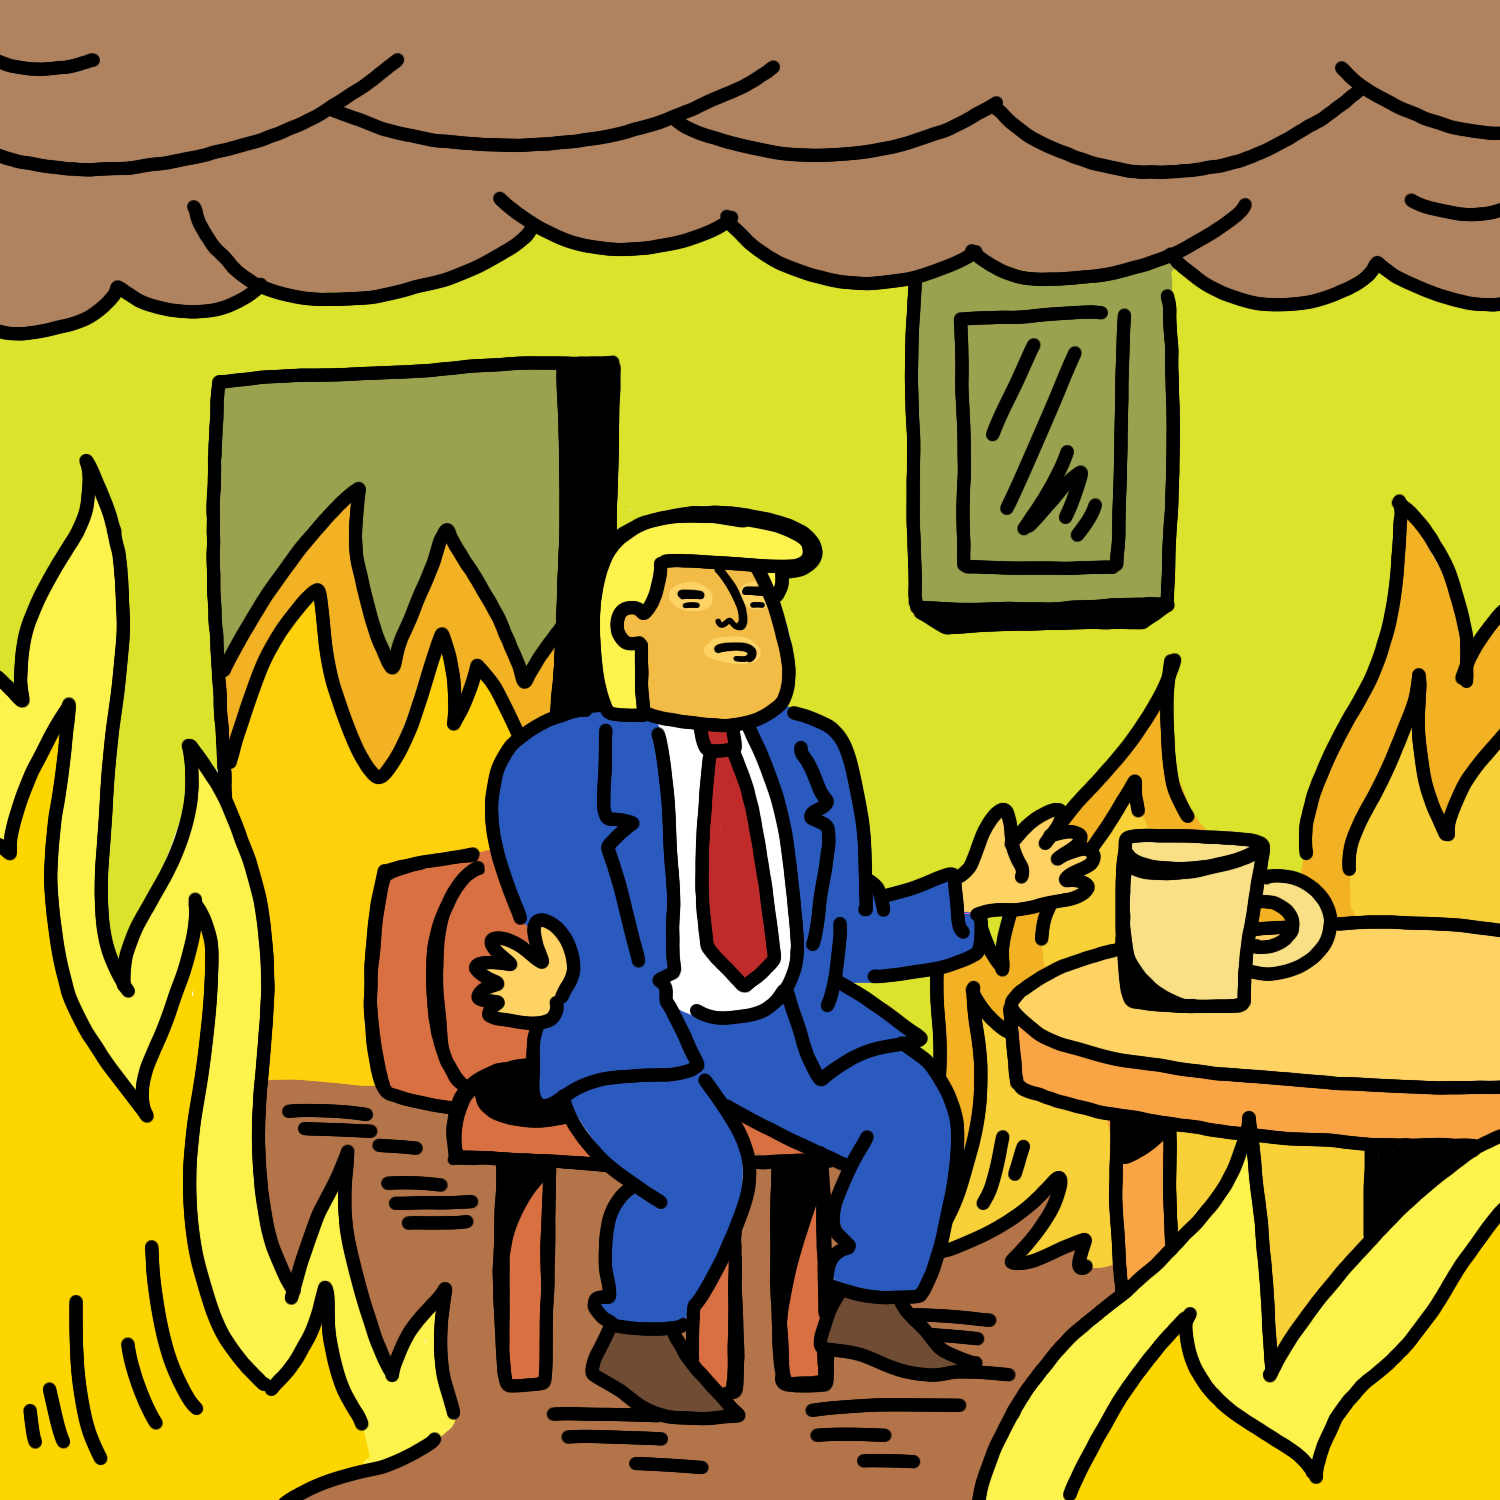 Trump sits in a chair surrounding by a house on fire mimicking a meme where a cartoon dog says "this is fine" while sitting in a chair in a burning building.